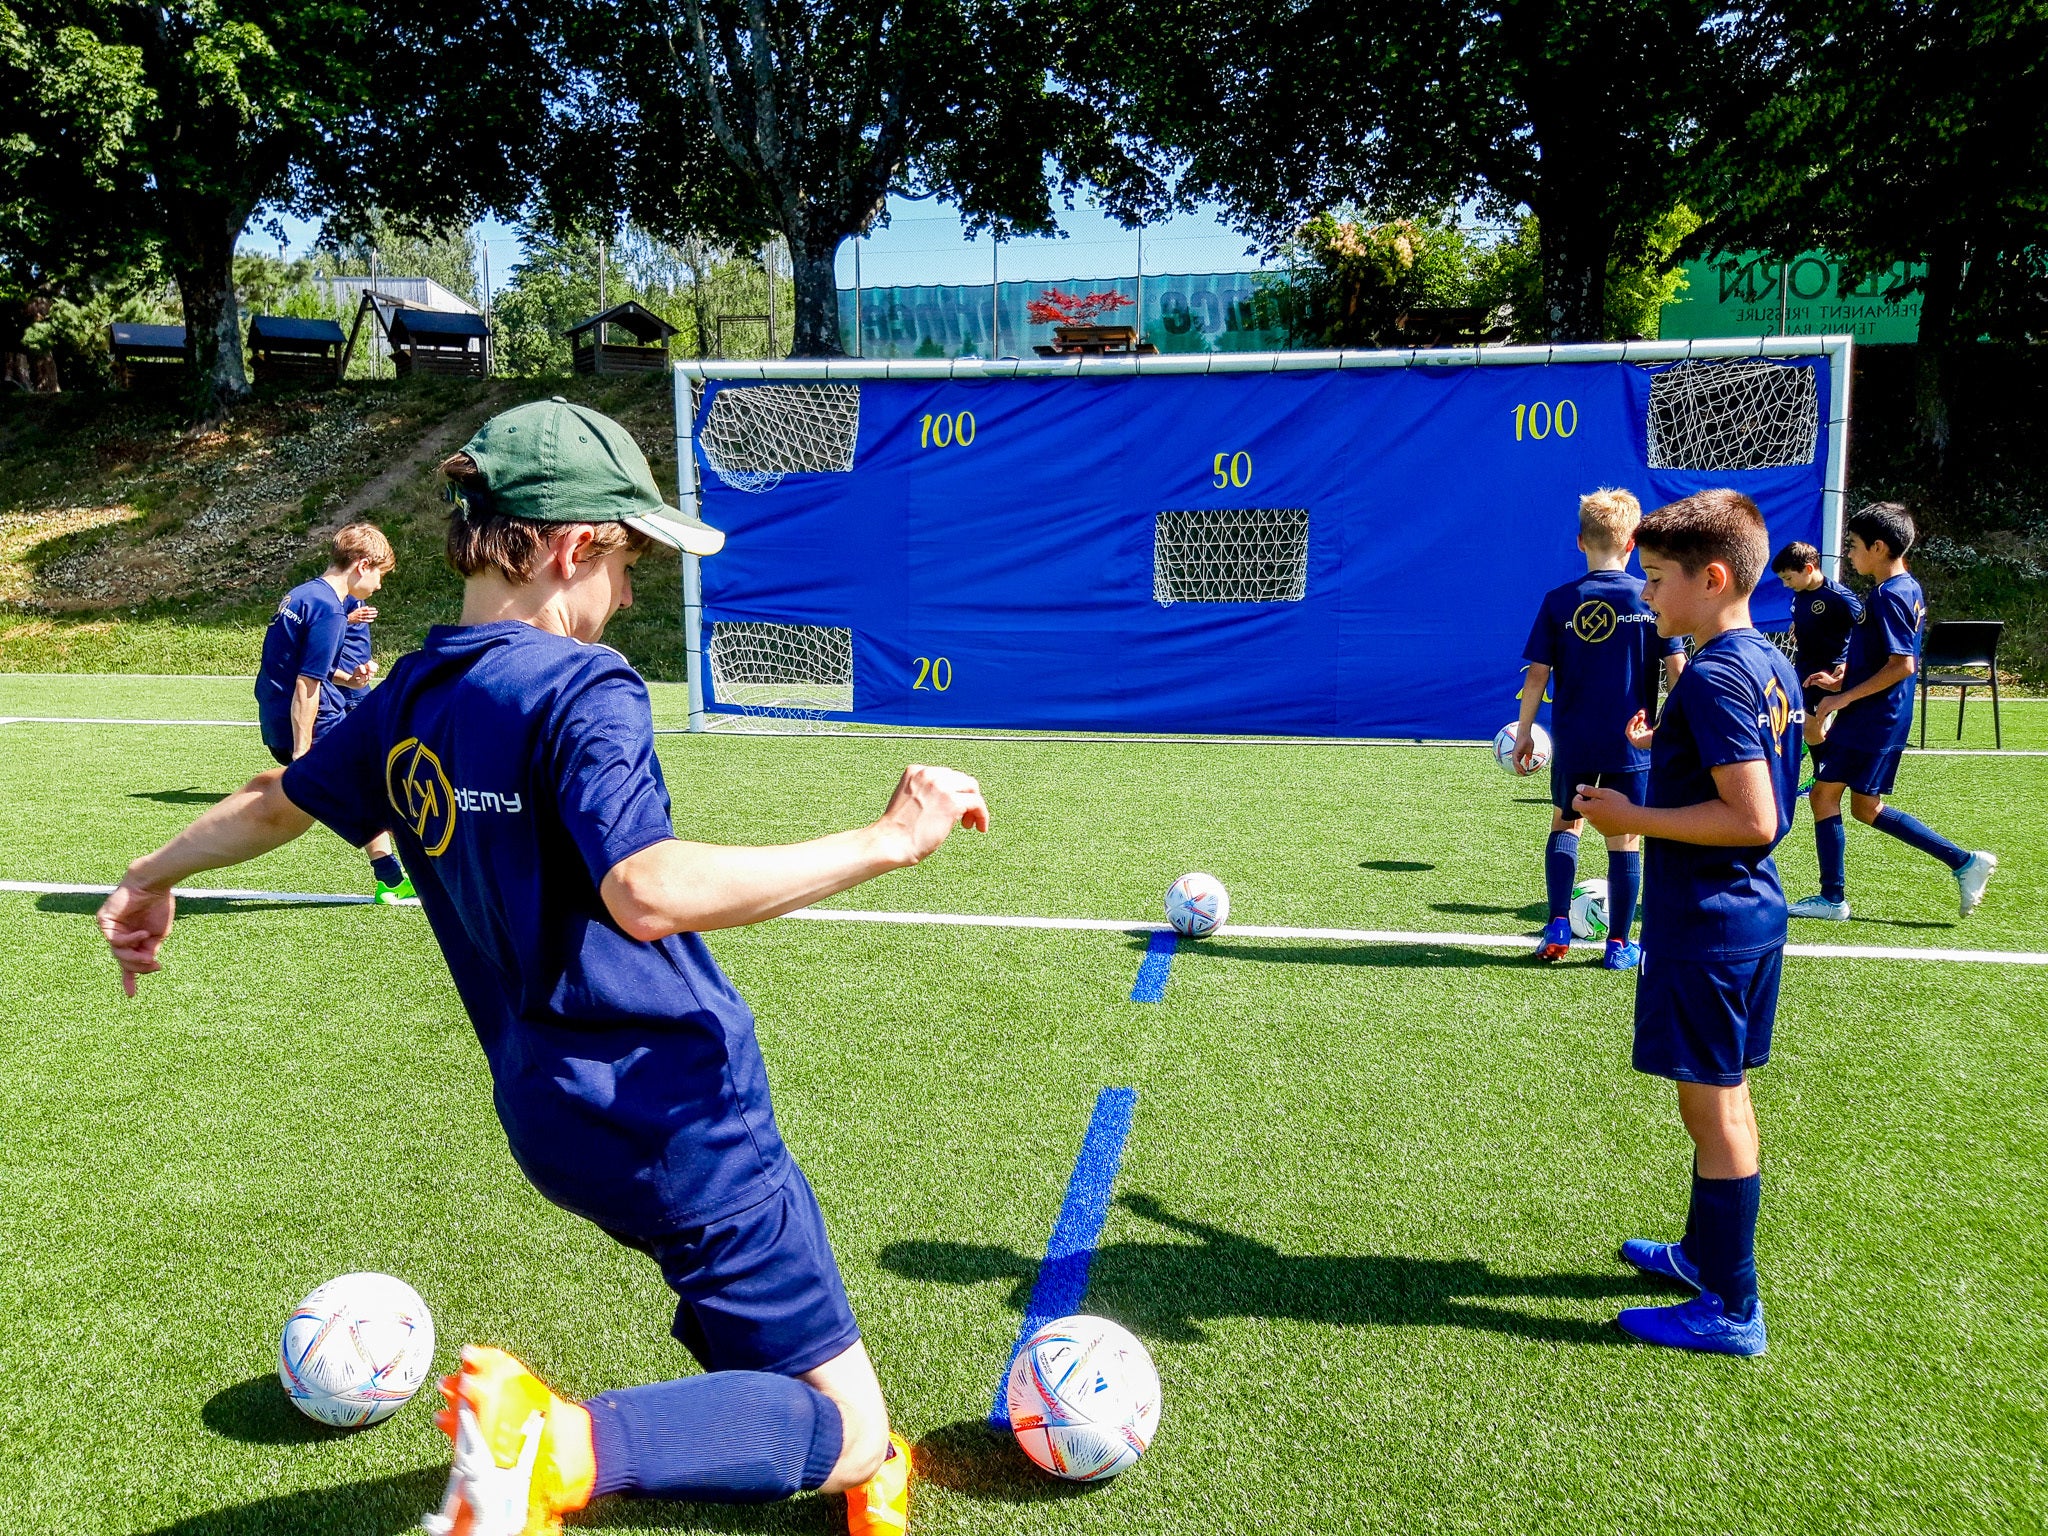 Football (Soccer) Camp - 5 to 16 years old - Full Day